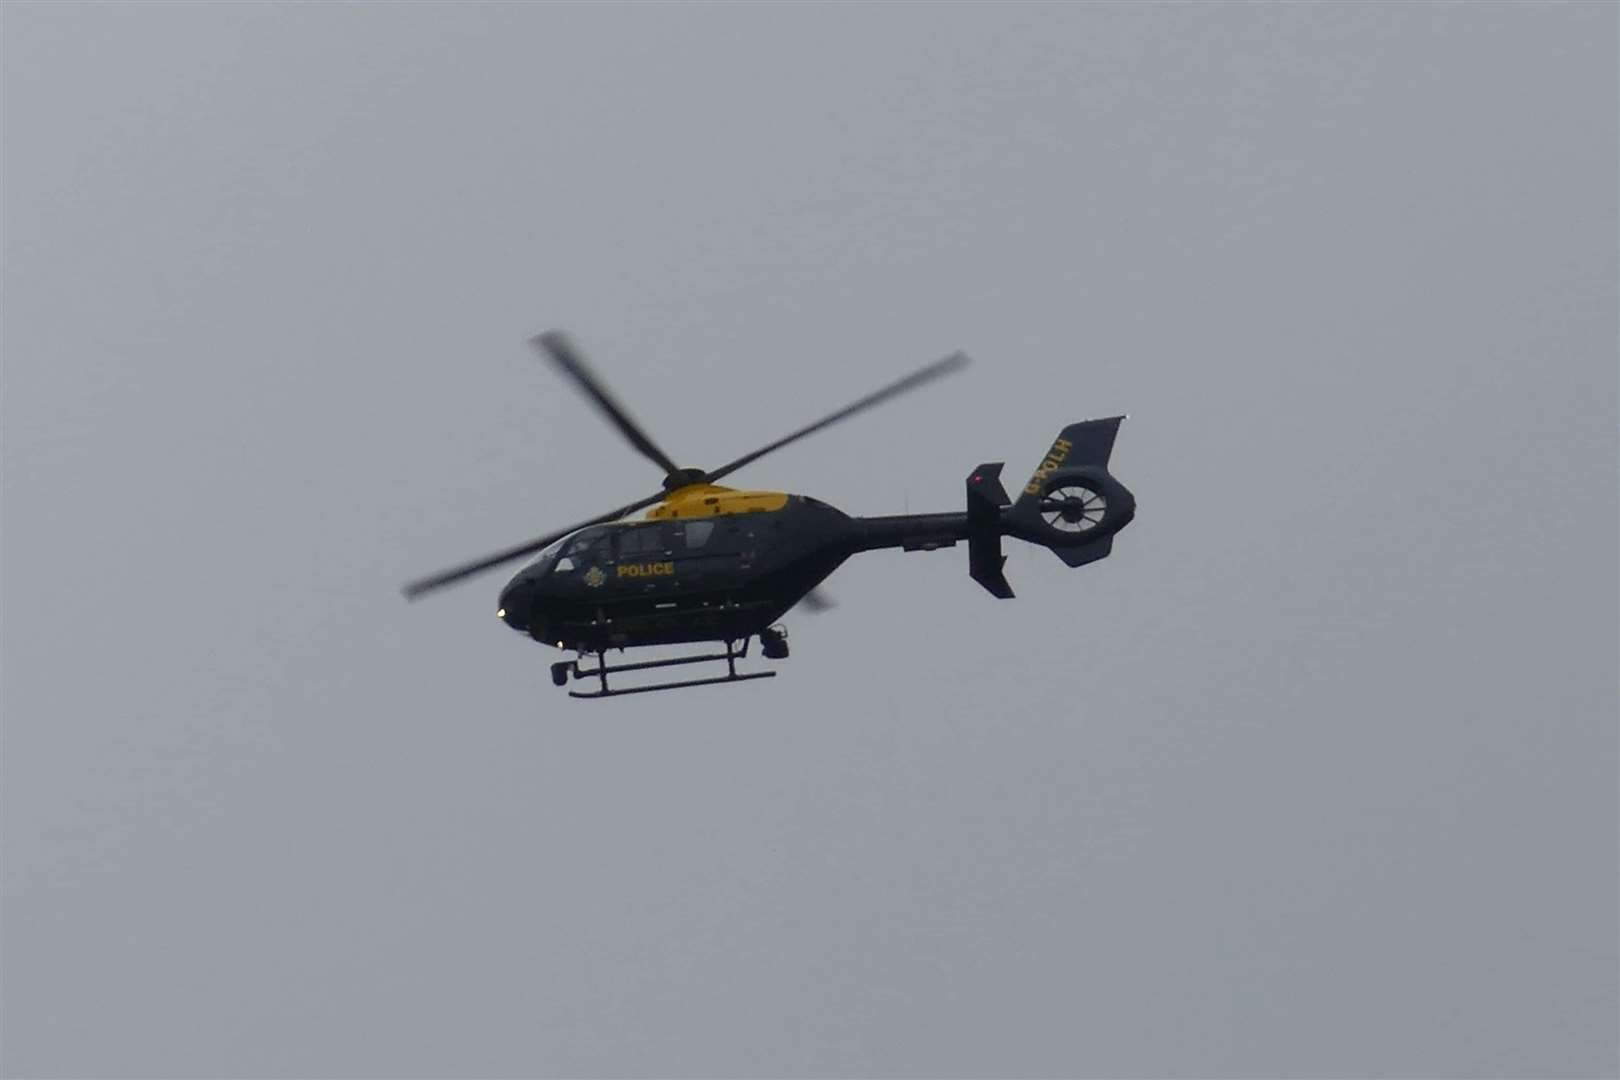 One of the two police helicopters spotted over Ashford town centre today. Picture: Andy Clark